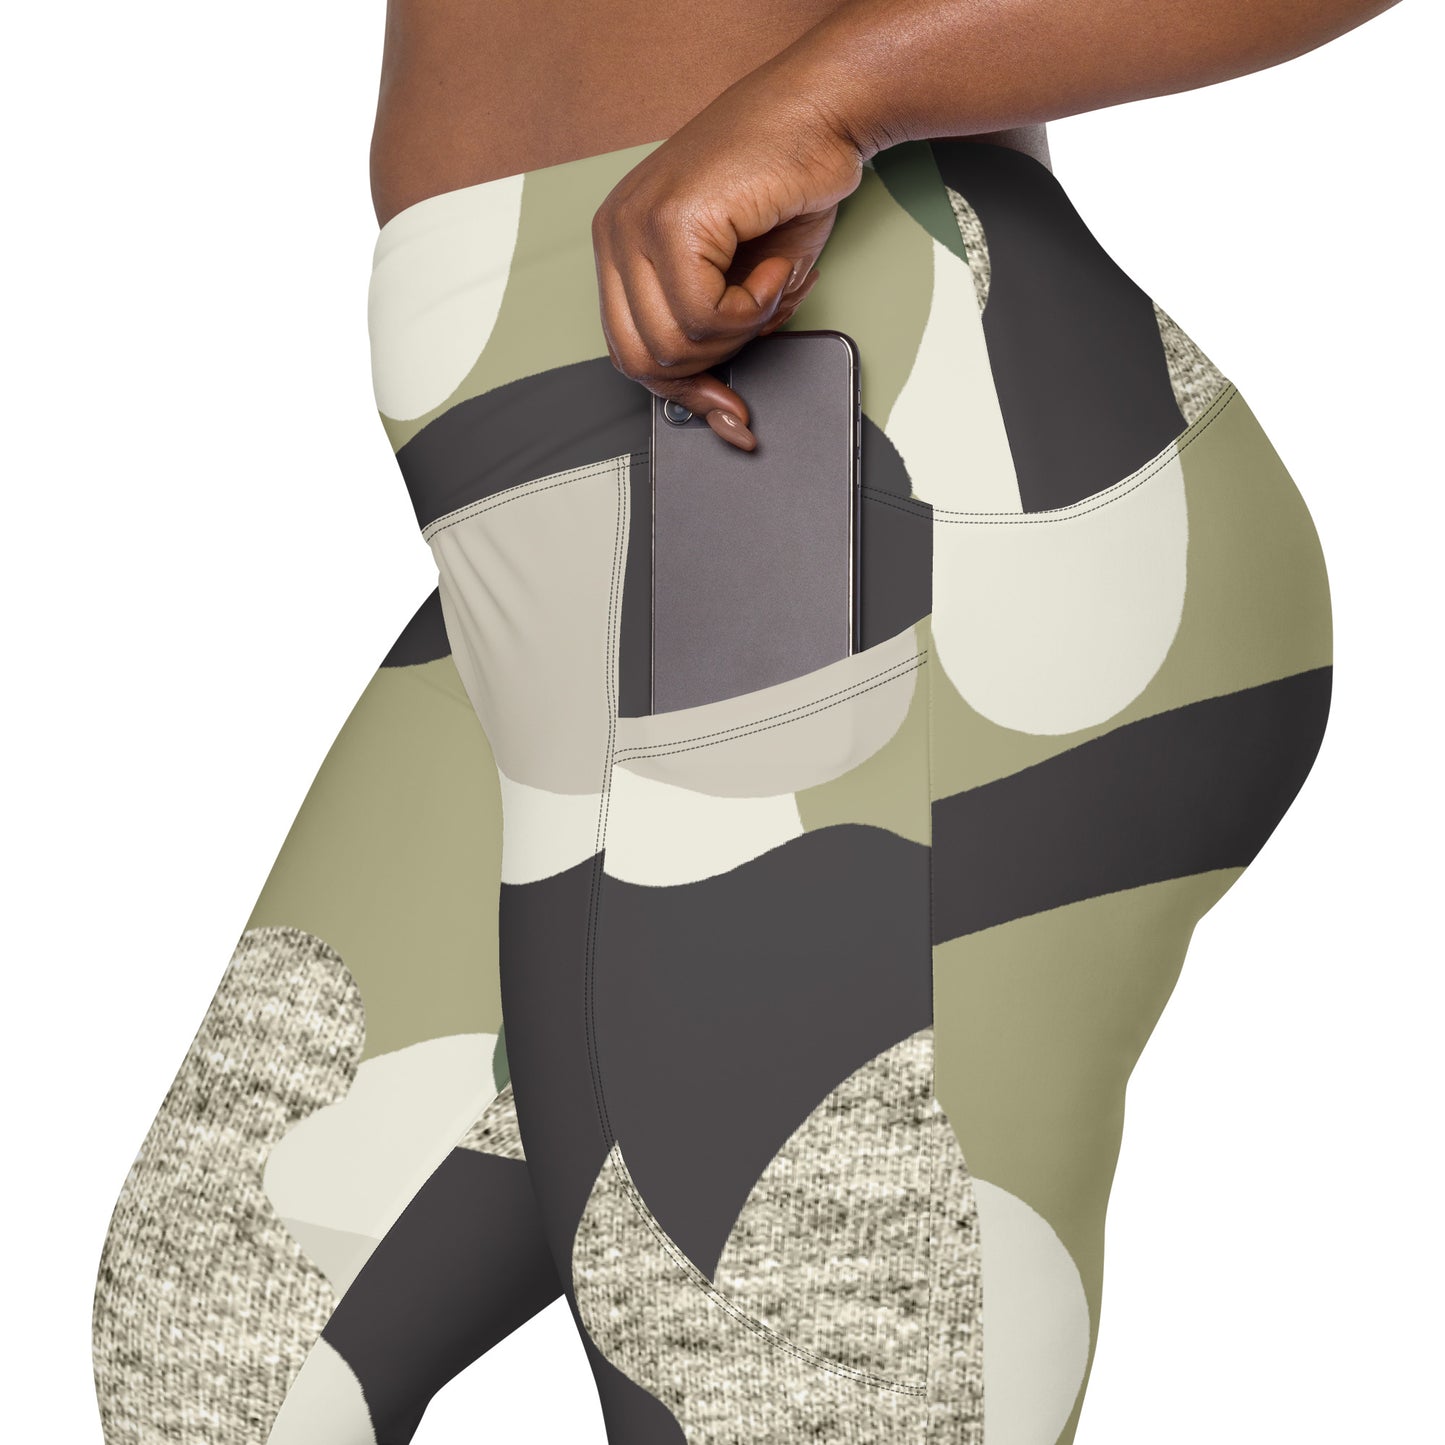 The Guy - Crossover leggings with pockets